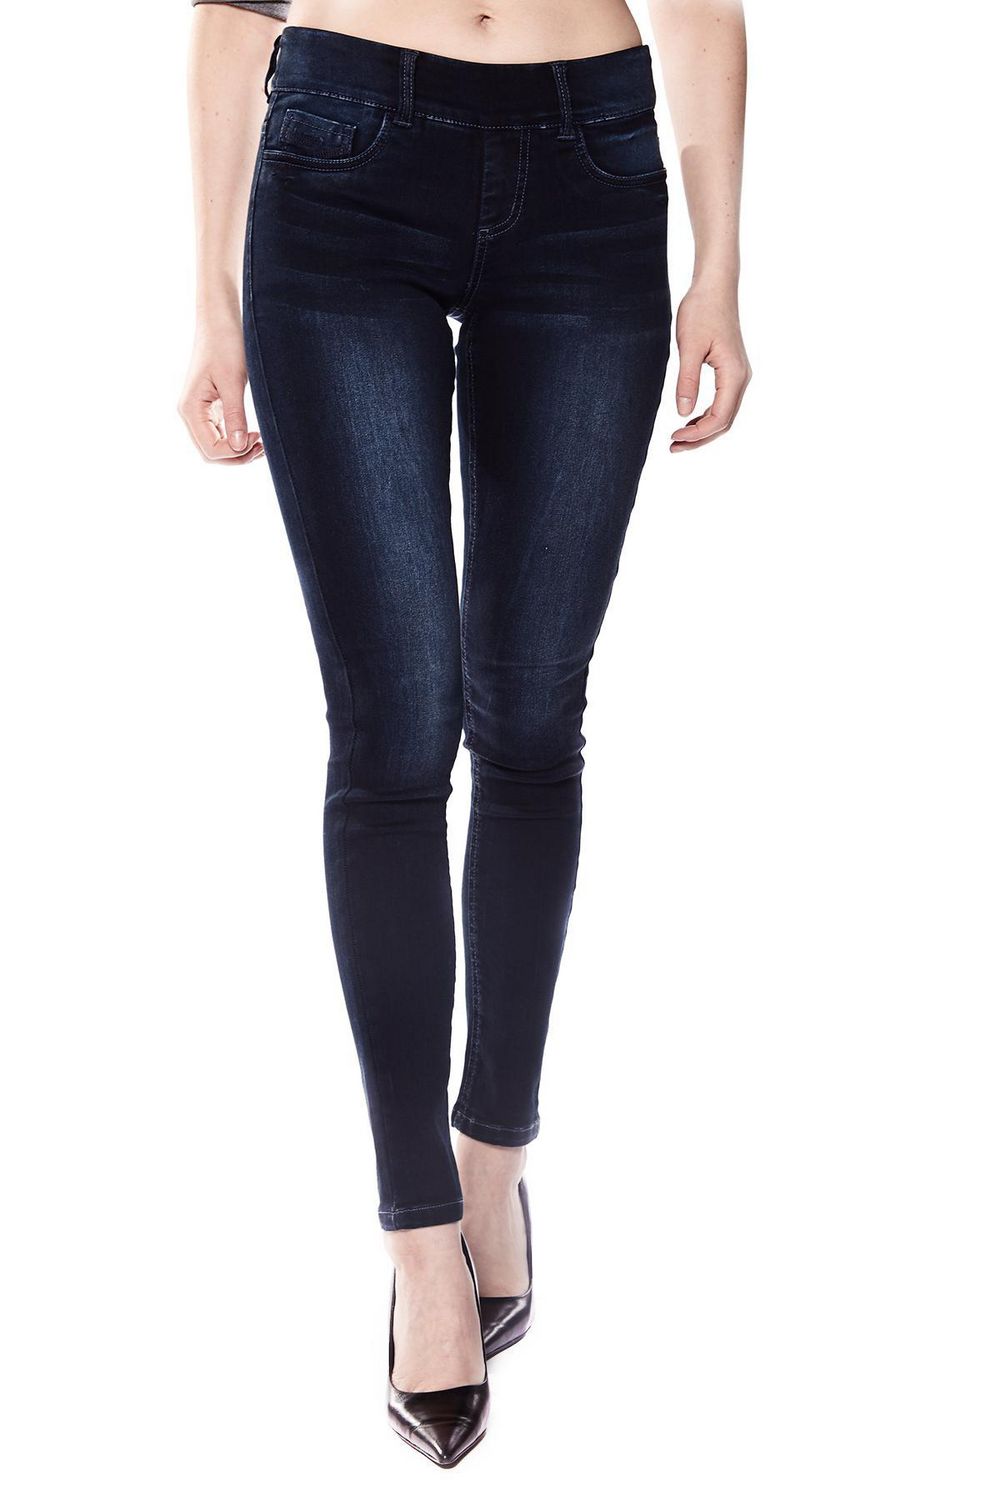 Time & Tru Pull On Skinny Jeggings Size Large - $14 - From Nicole